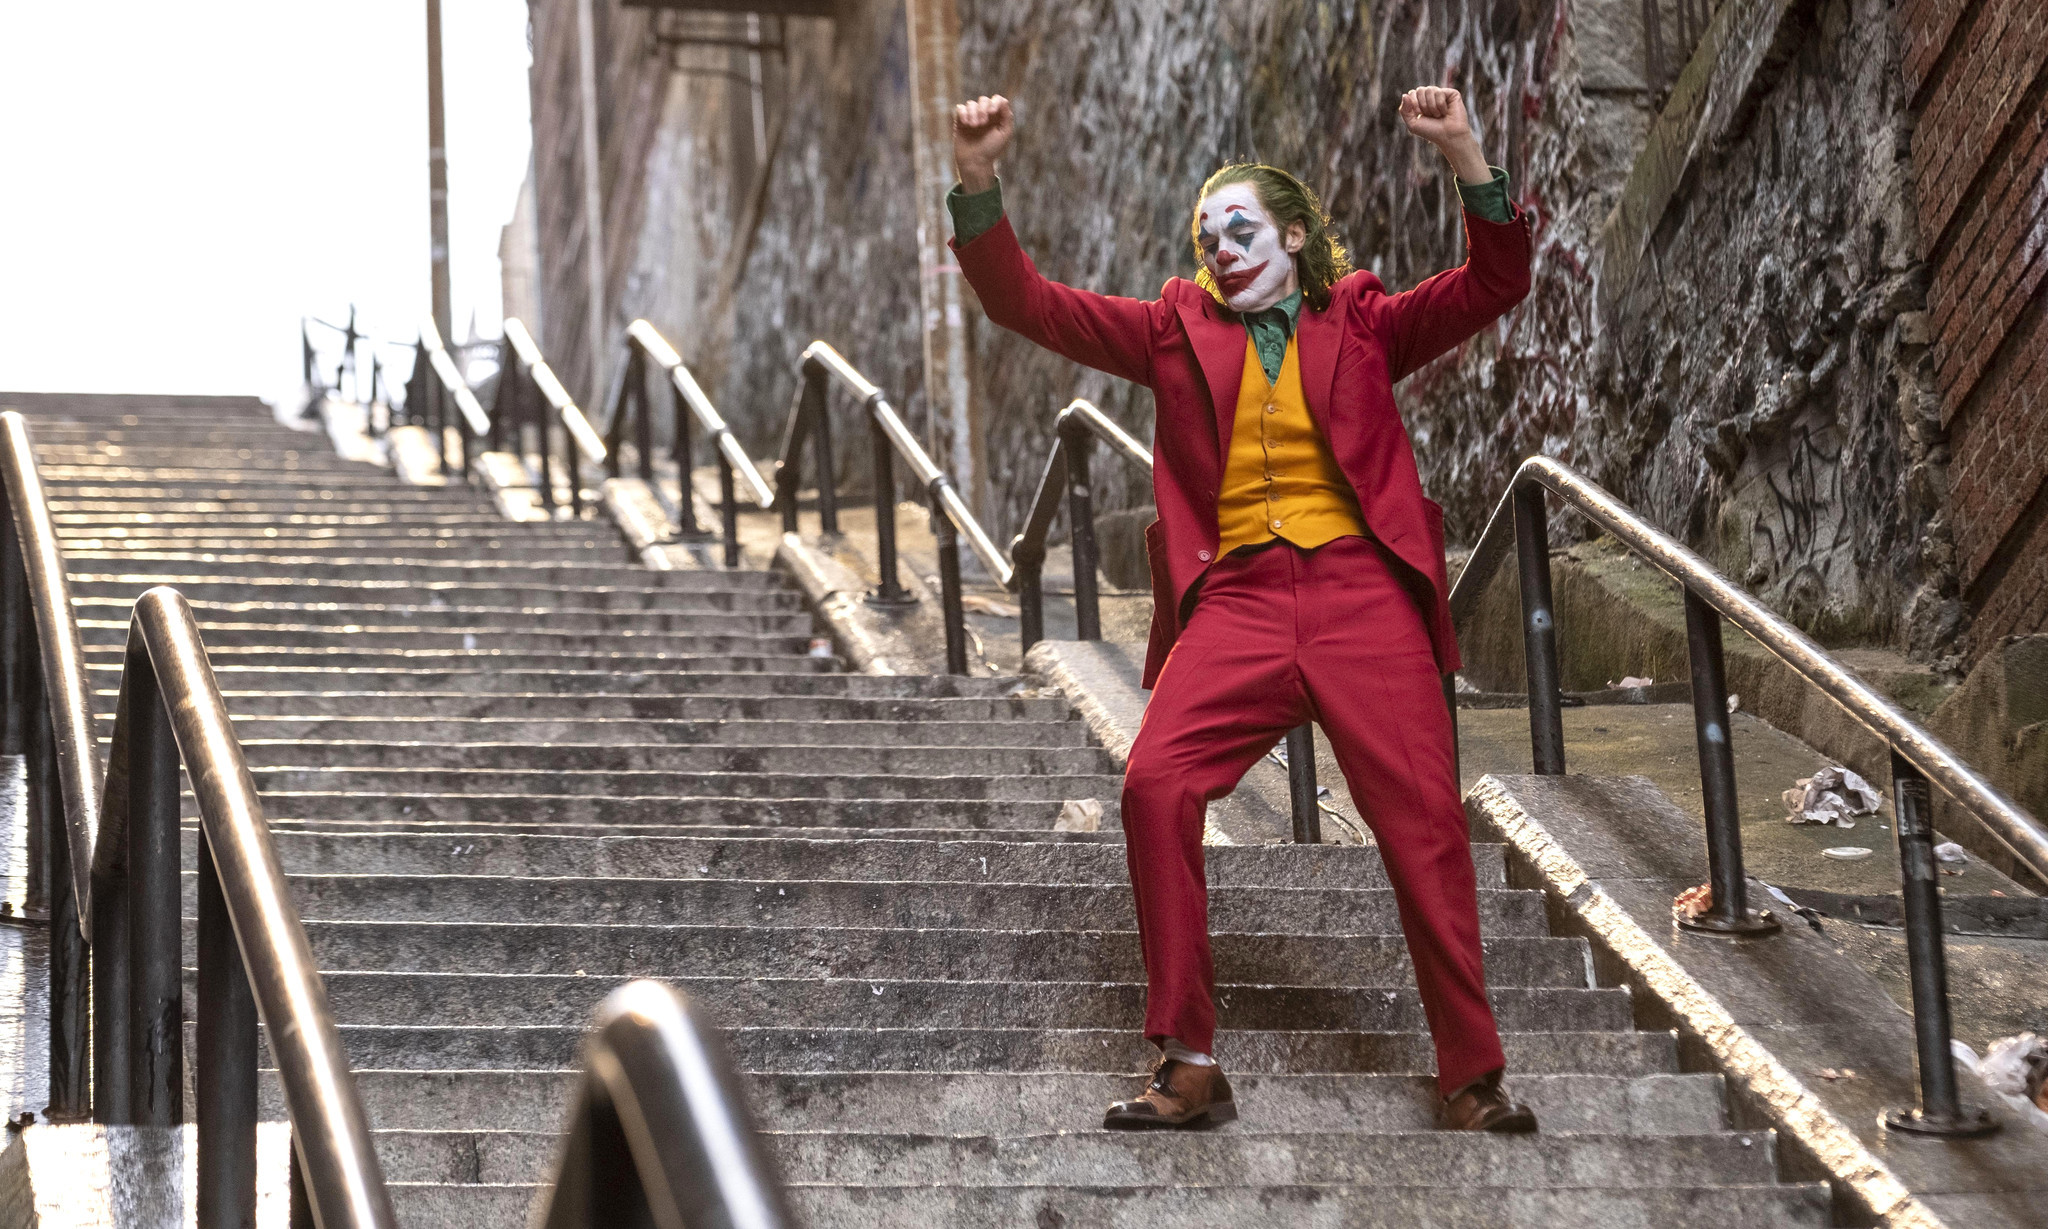 ‘Joker’ is the first R-rated movie to make over $1 billion